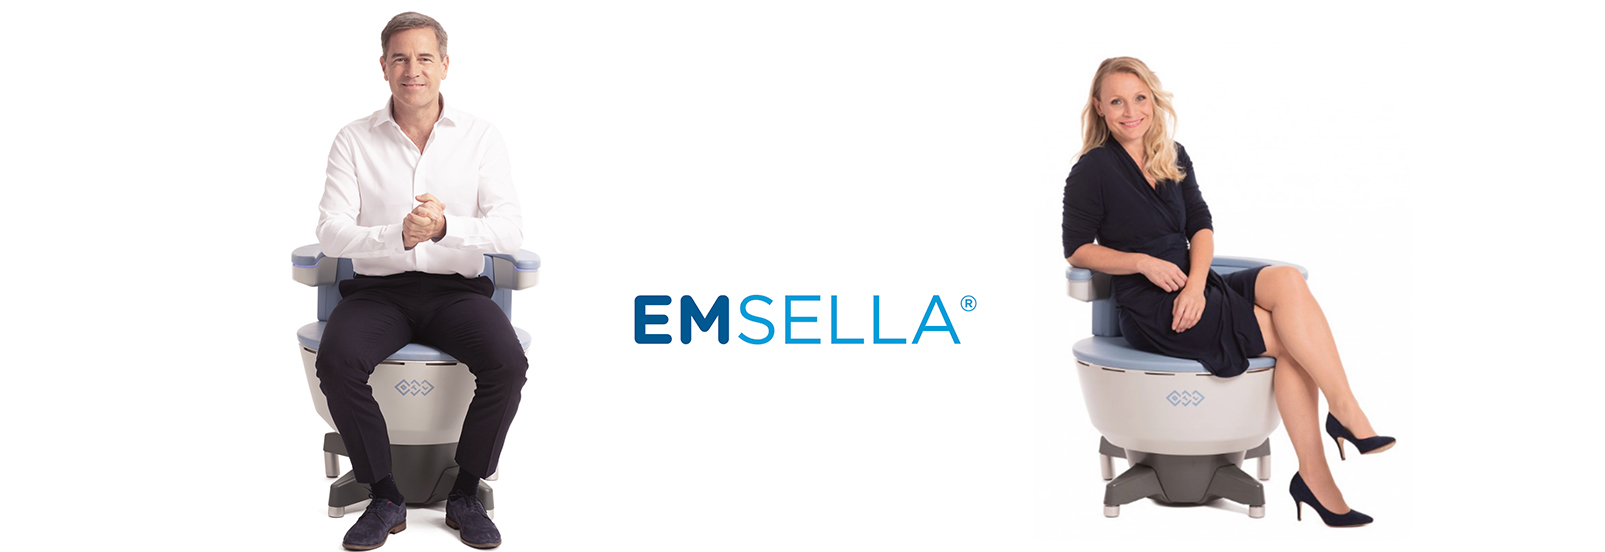 BTL EMSELLA™ LIVE YOUR LIFE WITH CONFIDENCE - Say goodbye to incontinence